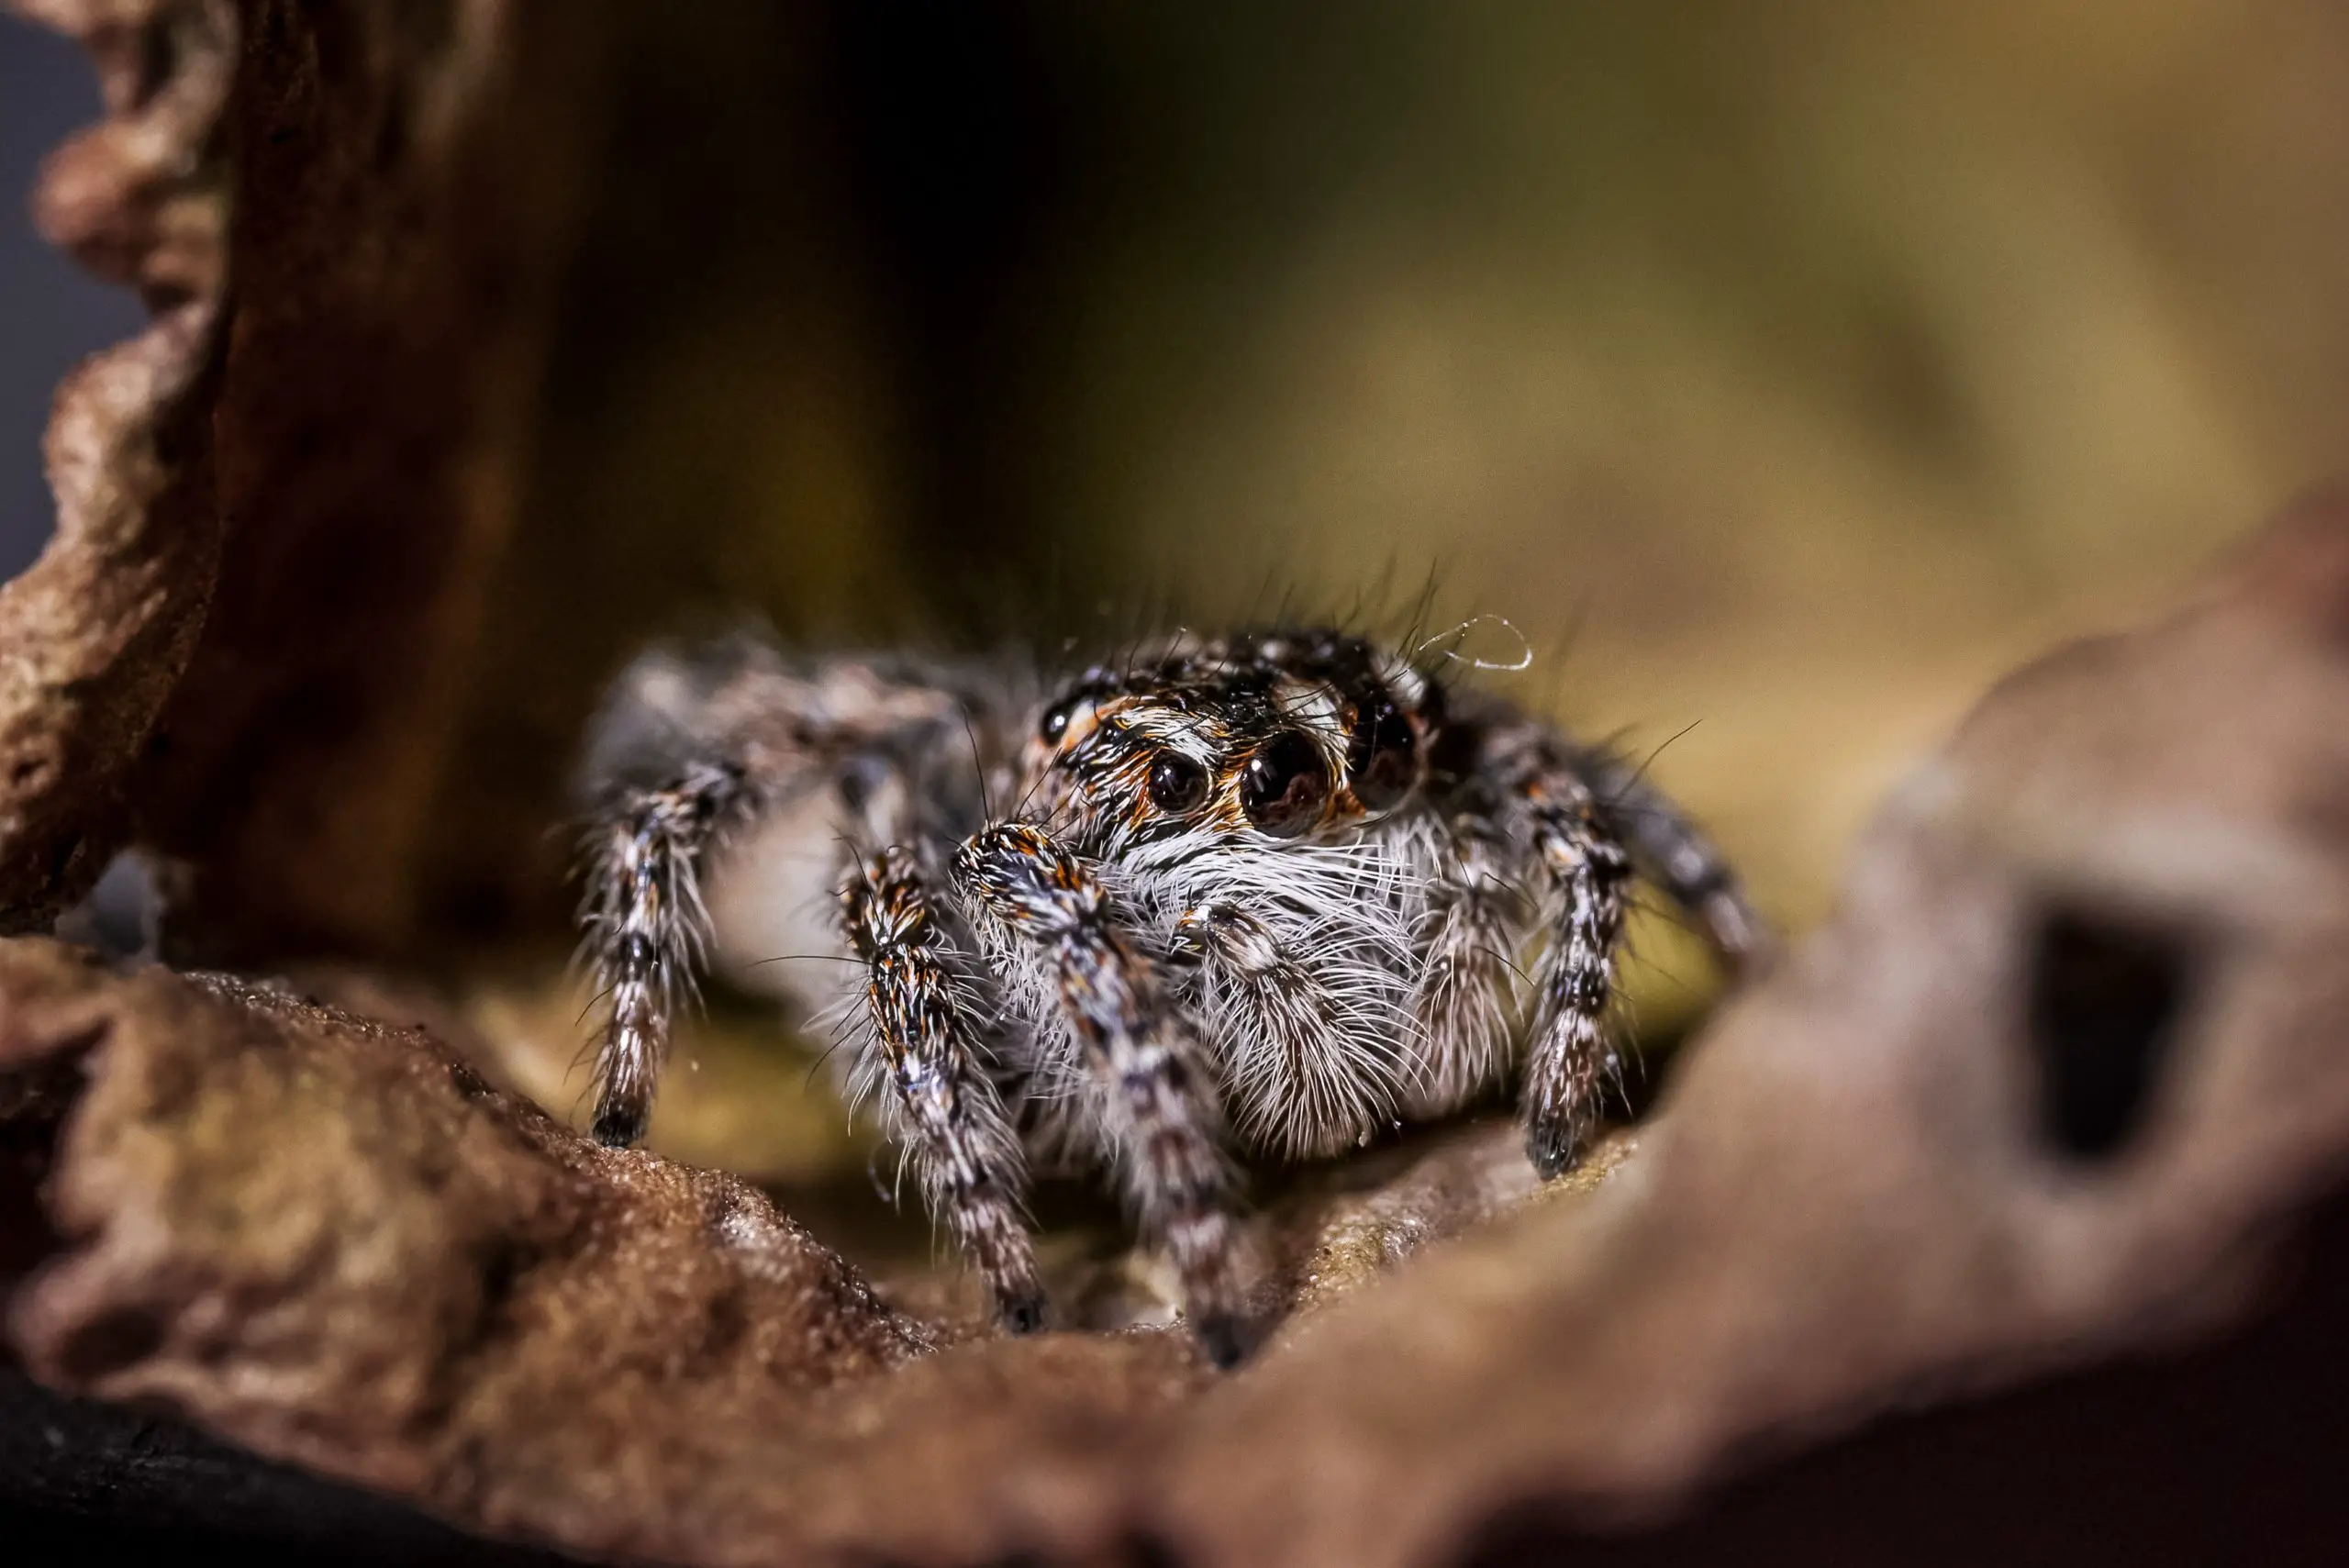 Jumping spider sat on a piece of bark.